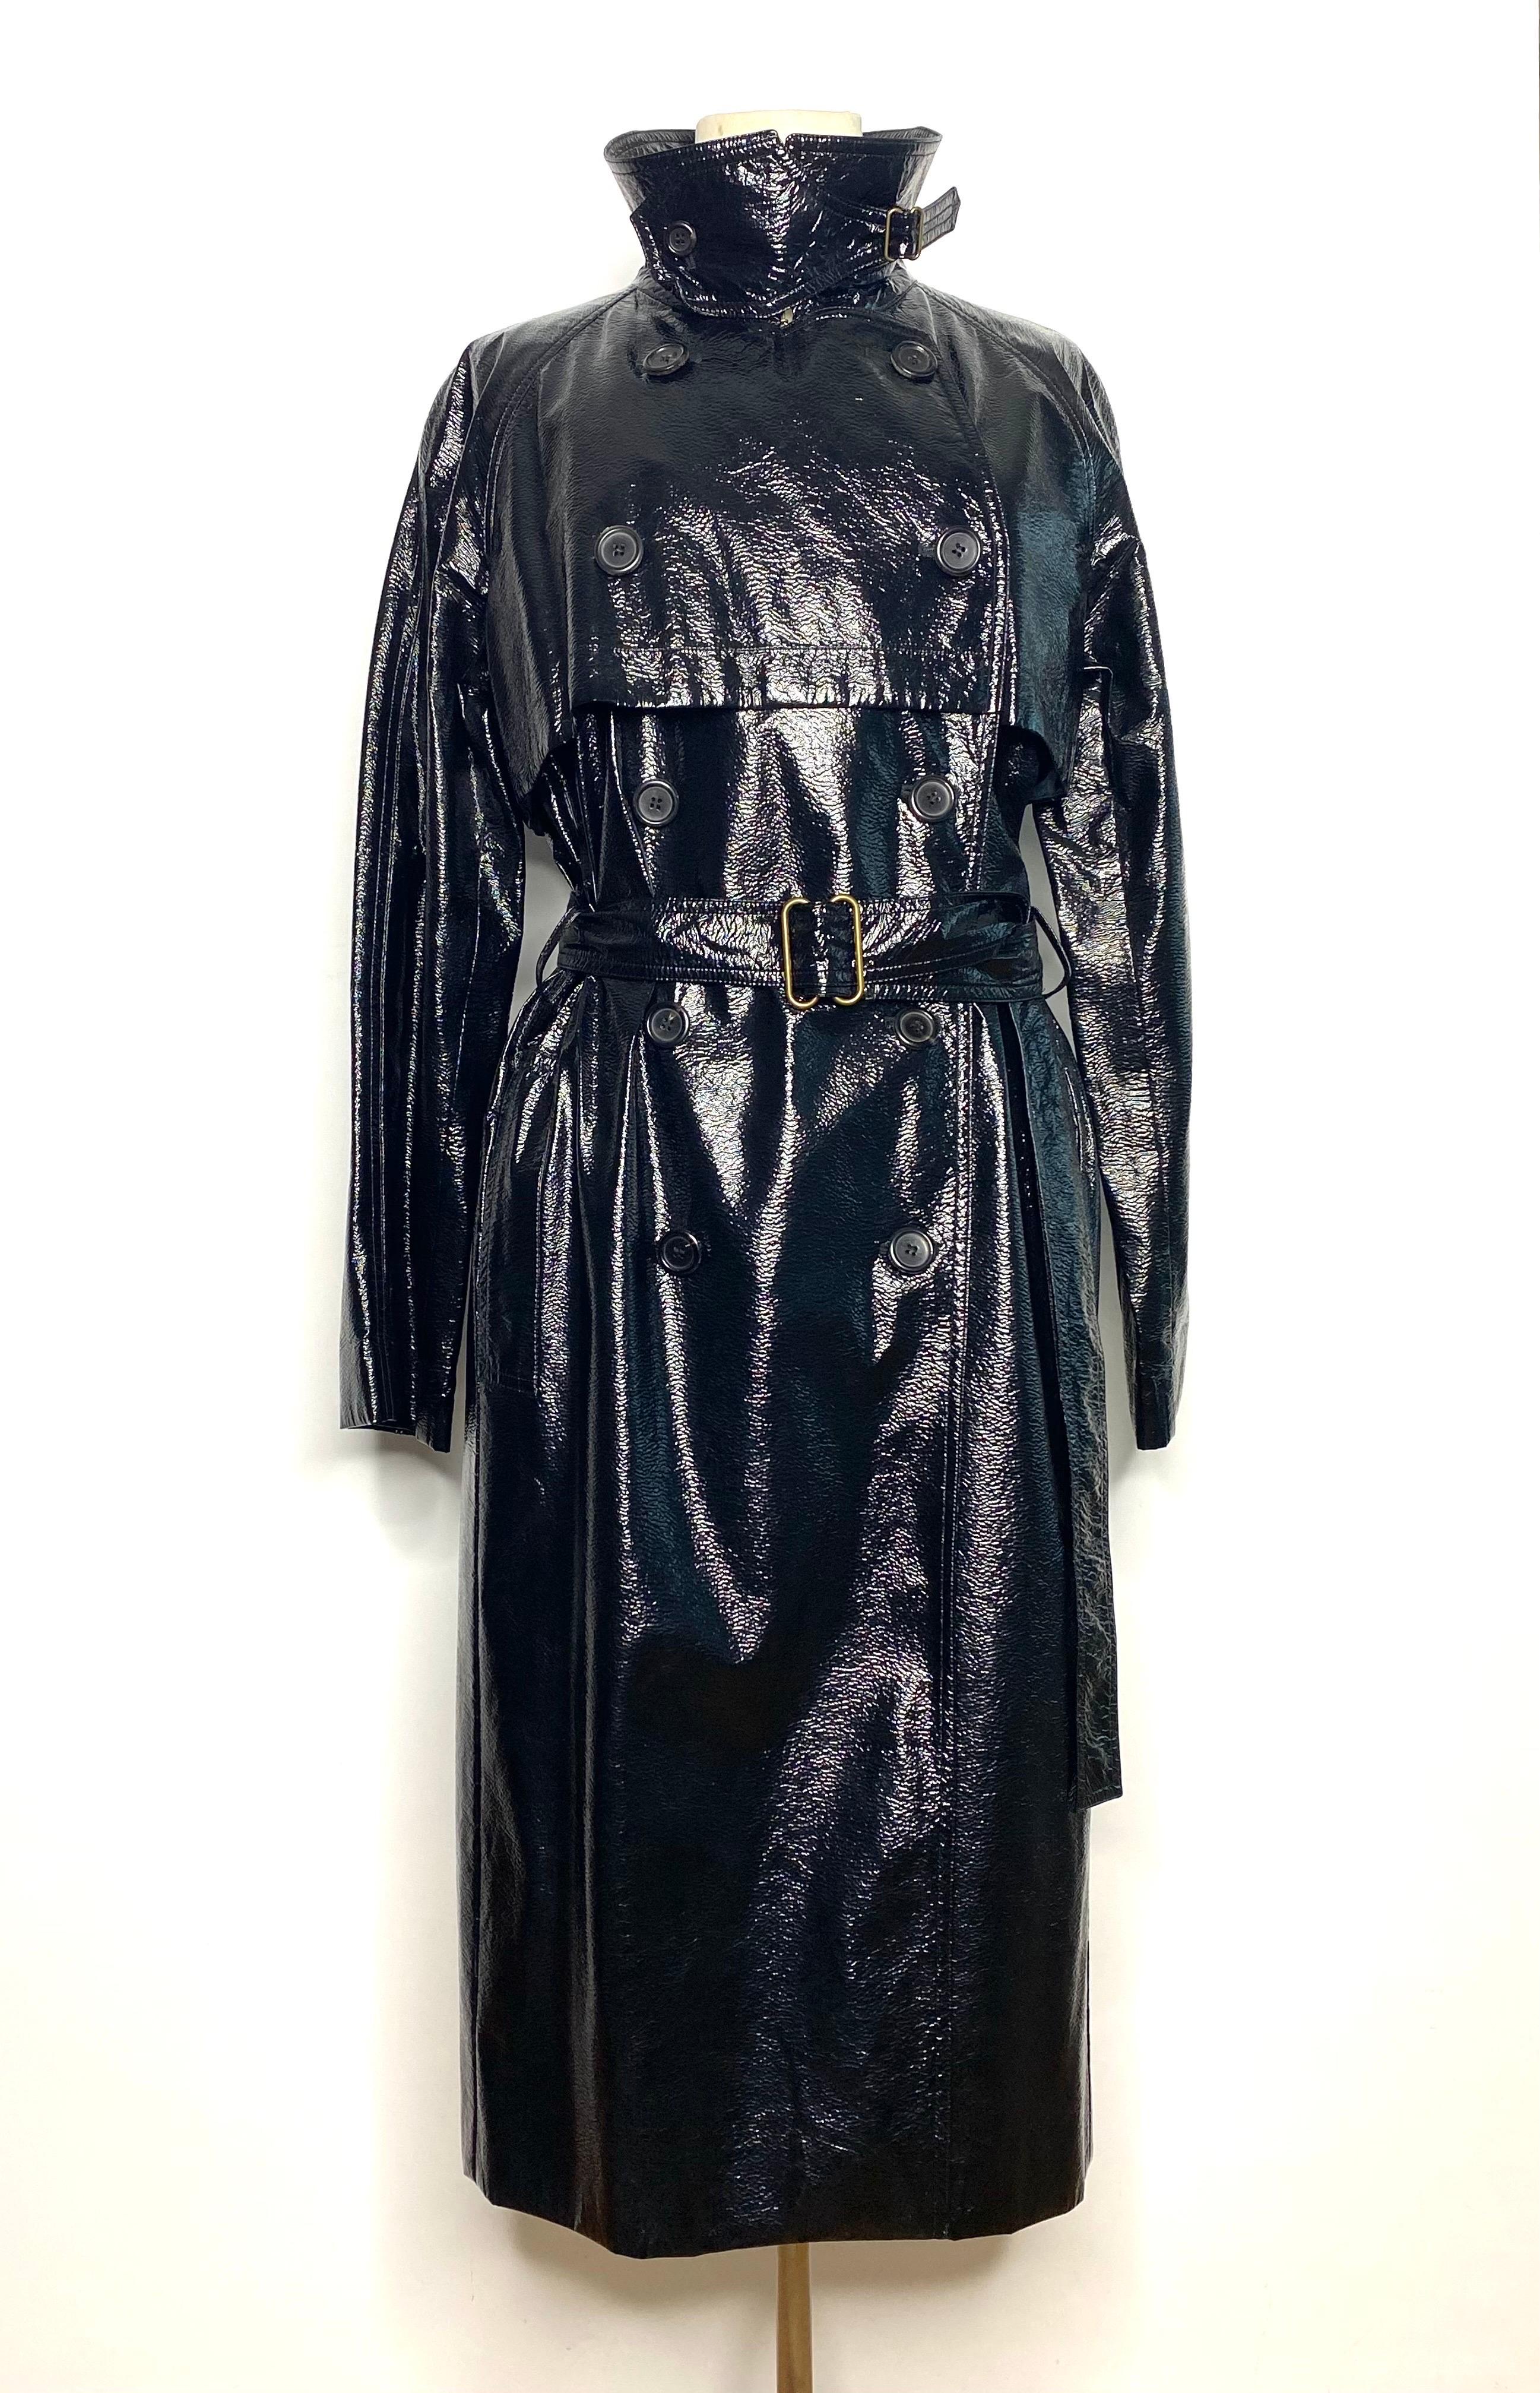 Ultra fashionable and sexy trench coat by Yves Saint
Laurent rive gauche (circa 90) fabric
sophisticated in
black varnished polyamide/polyurethane, material
light,
shiny and cracked effect all over the
surface.
Classic trench construction,